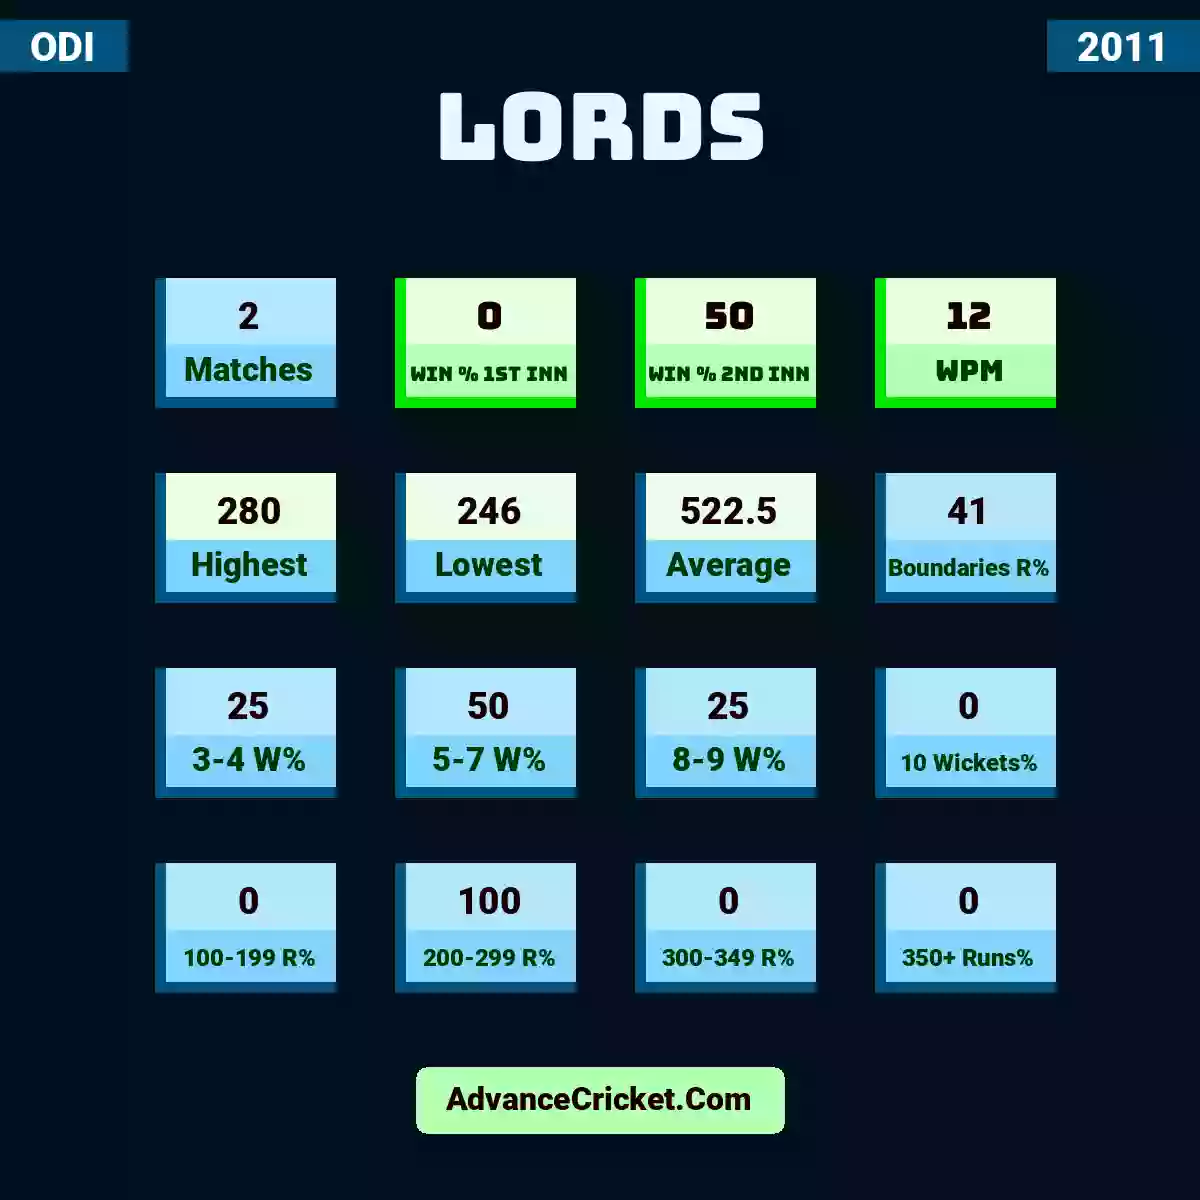 Image showing Lords with Matches: 2, Win % 1st Inn: 0, Win % 2nd Inn: 50, WPM: 12, Highest: 280, Lowest: 246, Average: 522.5, Boundaries R%: 41, 3-4 W%: 25, 5-7 W%: 50, 8-9 W%: 25, 10 Wickets%: 0, 100-199 R%: 0, 200-299 R%: 100, 300-349 R%: 0, 350+ Runs%: 0.